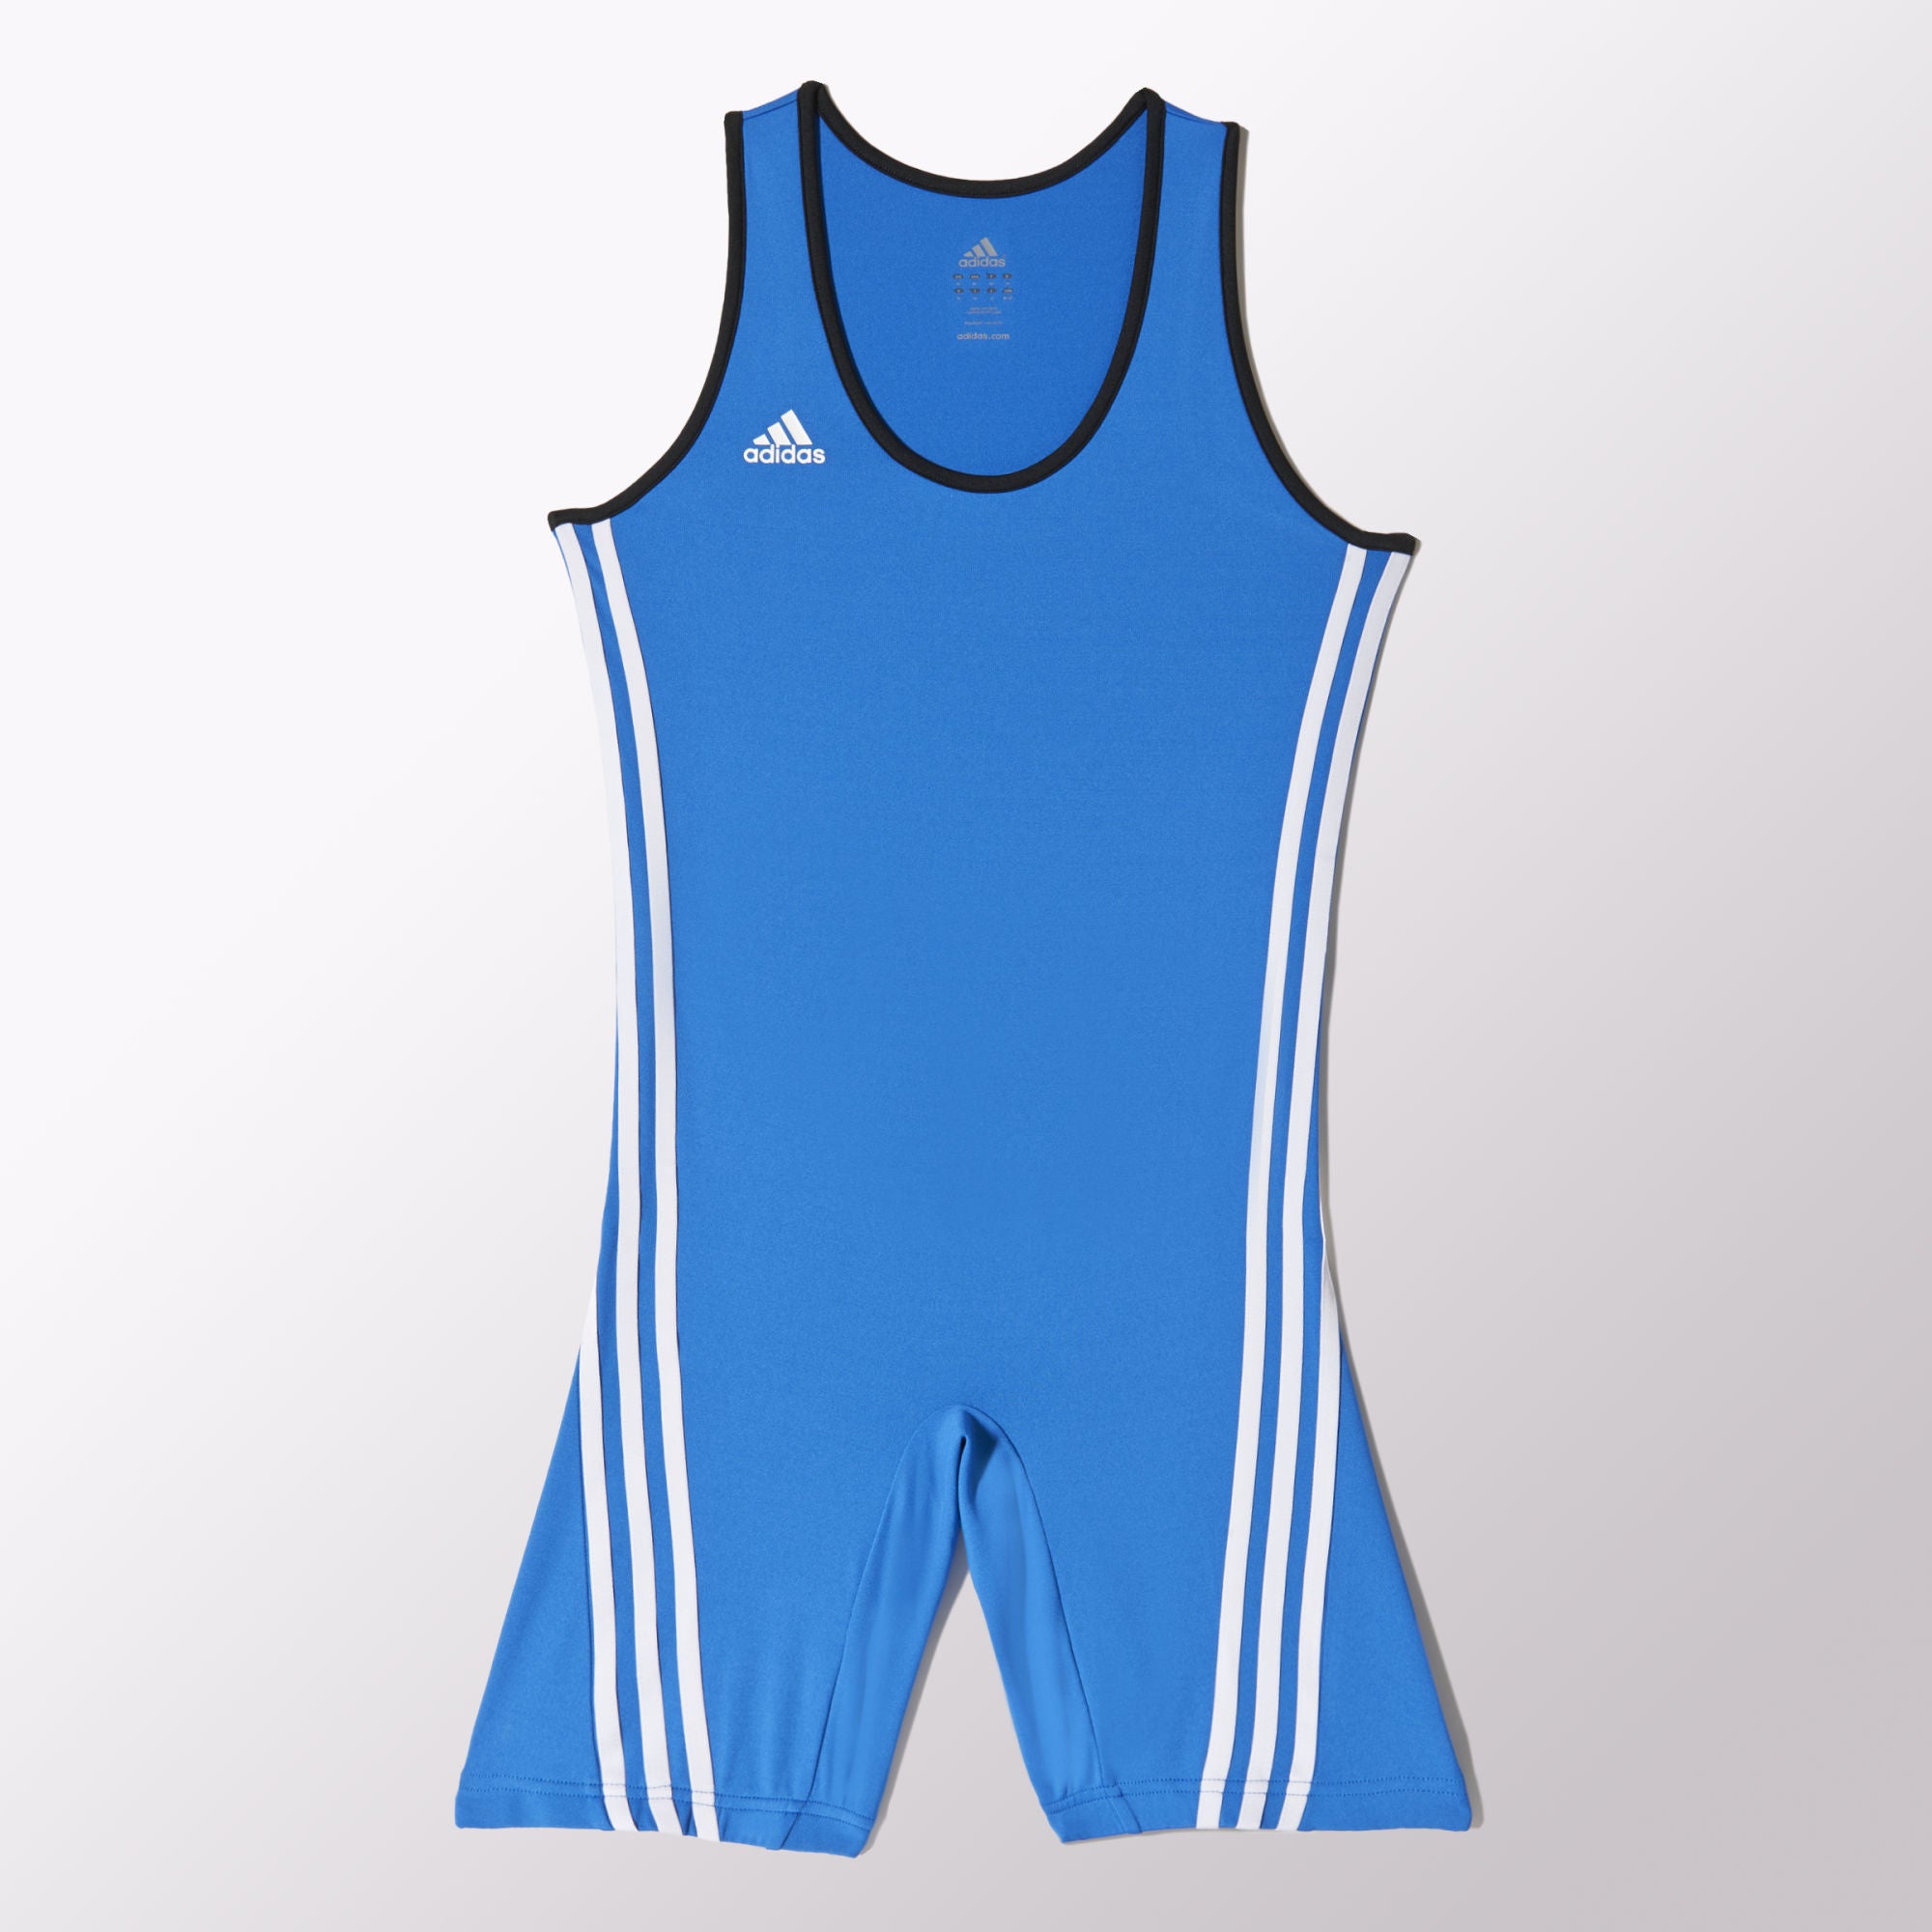 adidas base lifter weightlifting suit